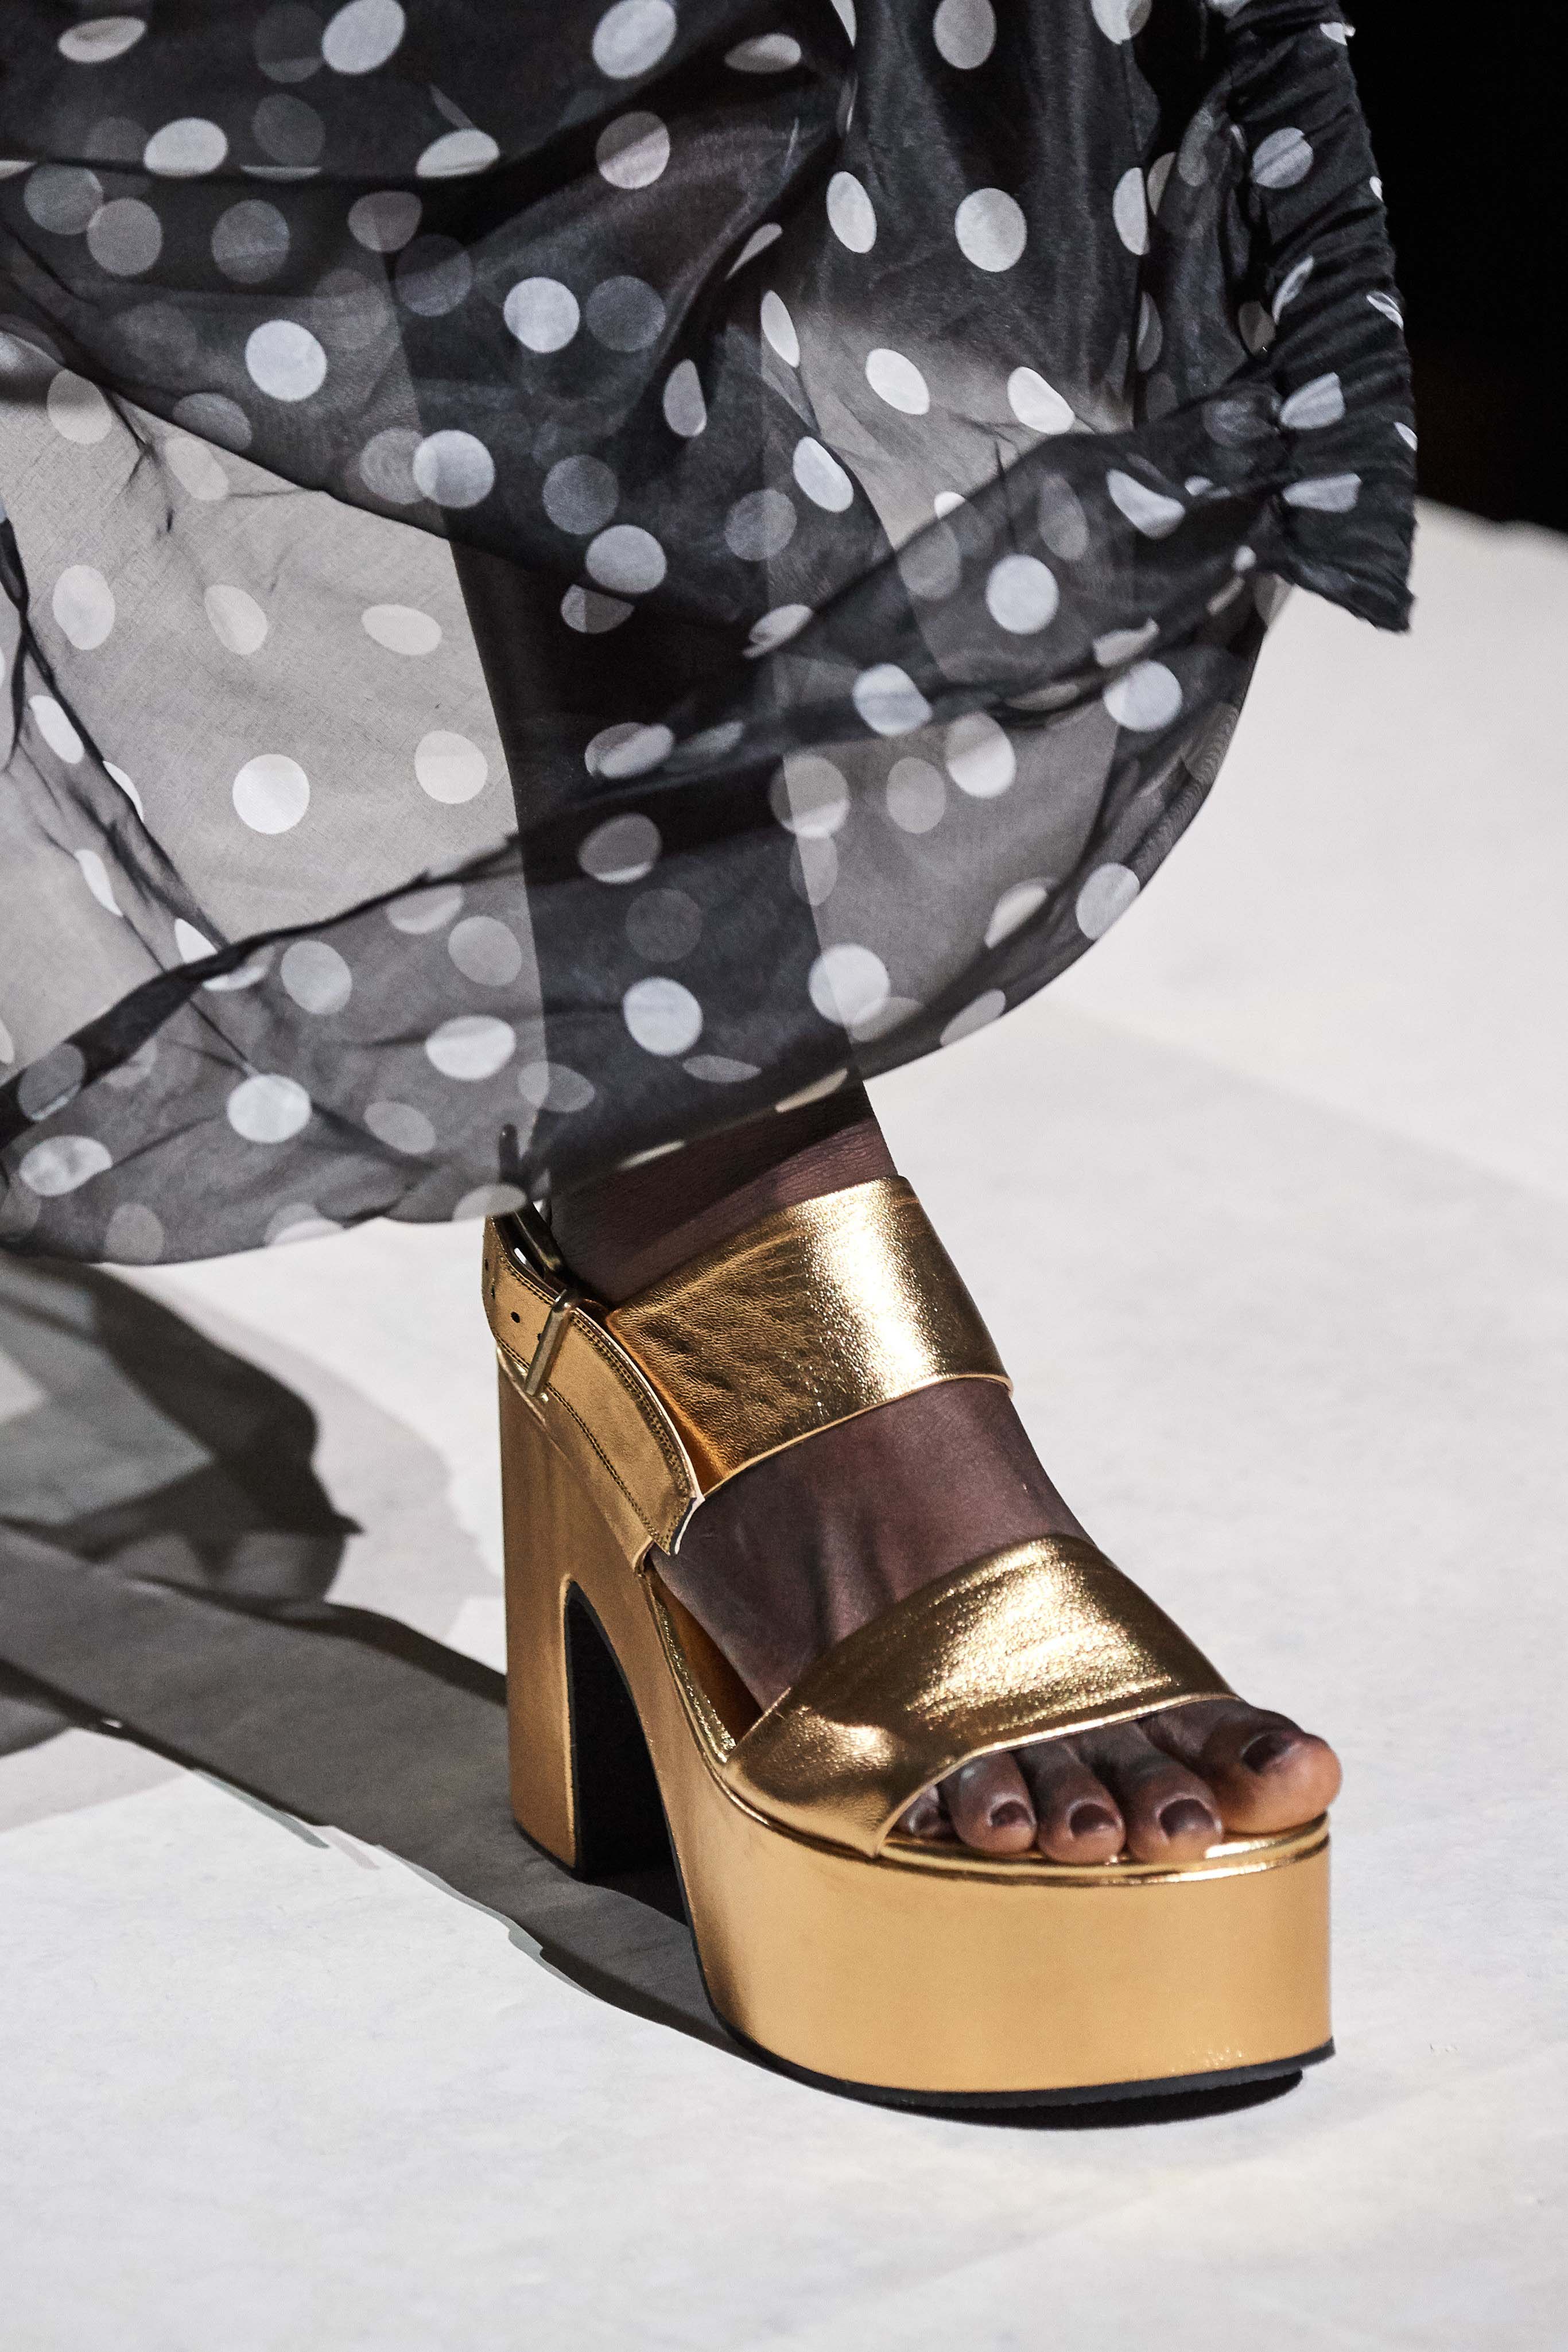 Dries Van Noten Spring Summer 2020 SS2020 trends runway coverage Ready To Wear Vogue shoes